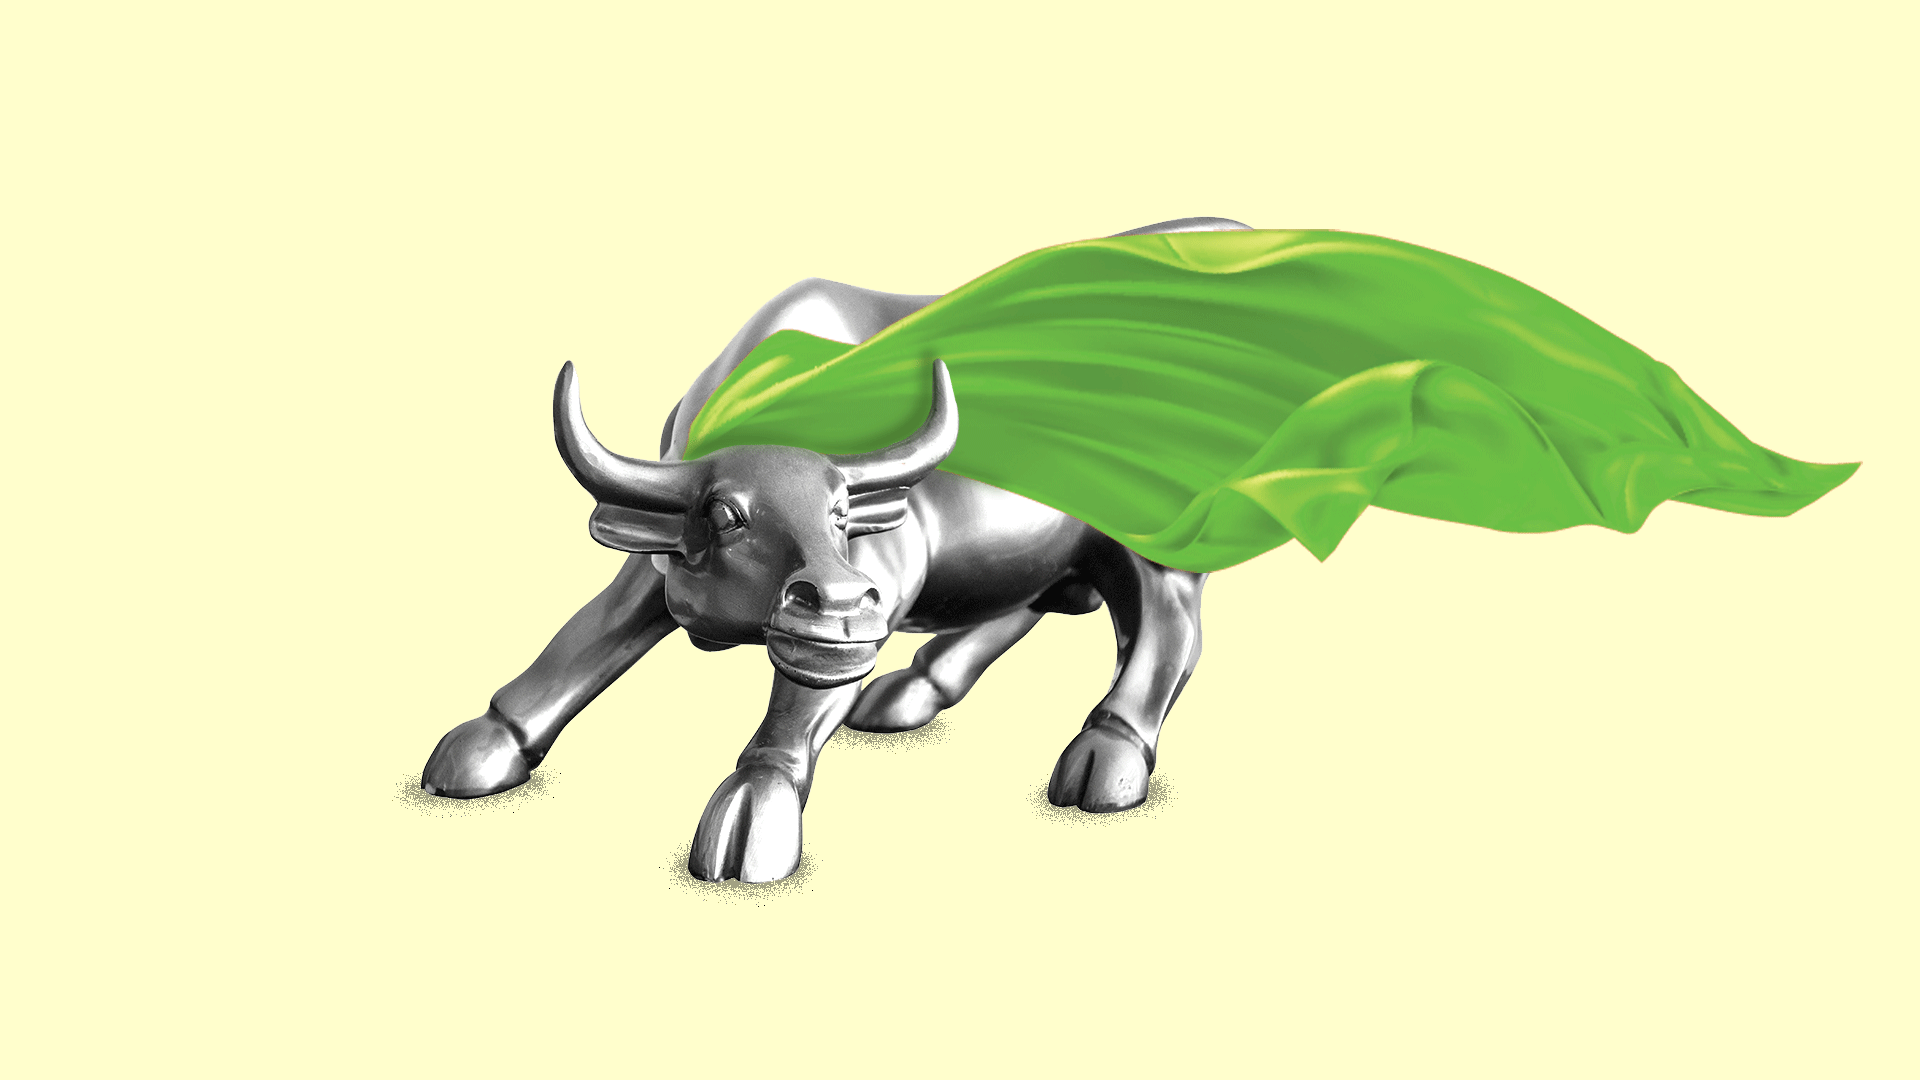 In this illustration, the Wall Street bull has a green cape.